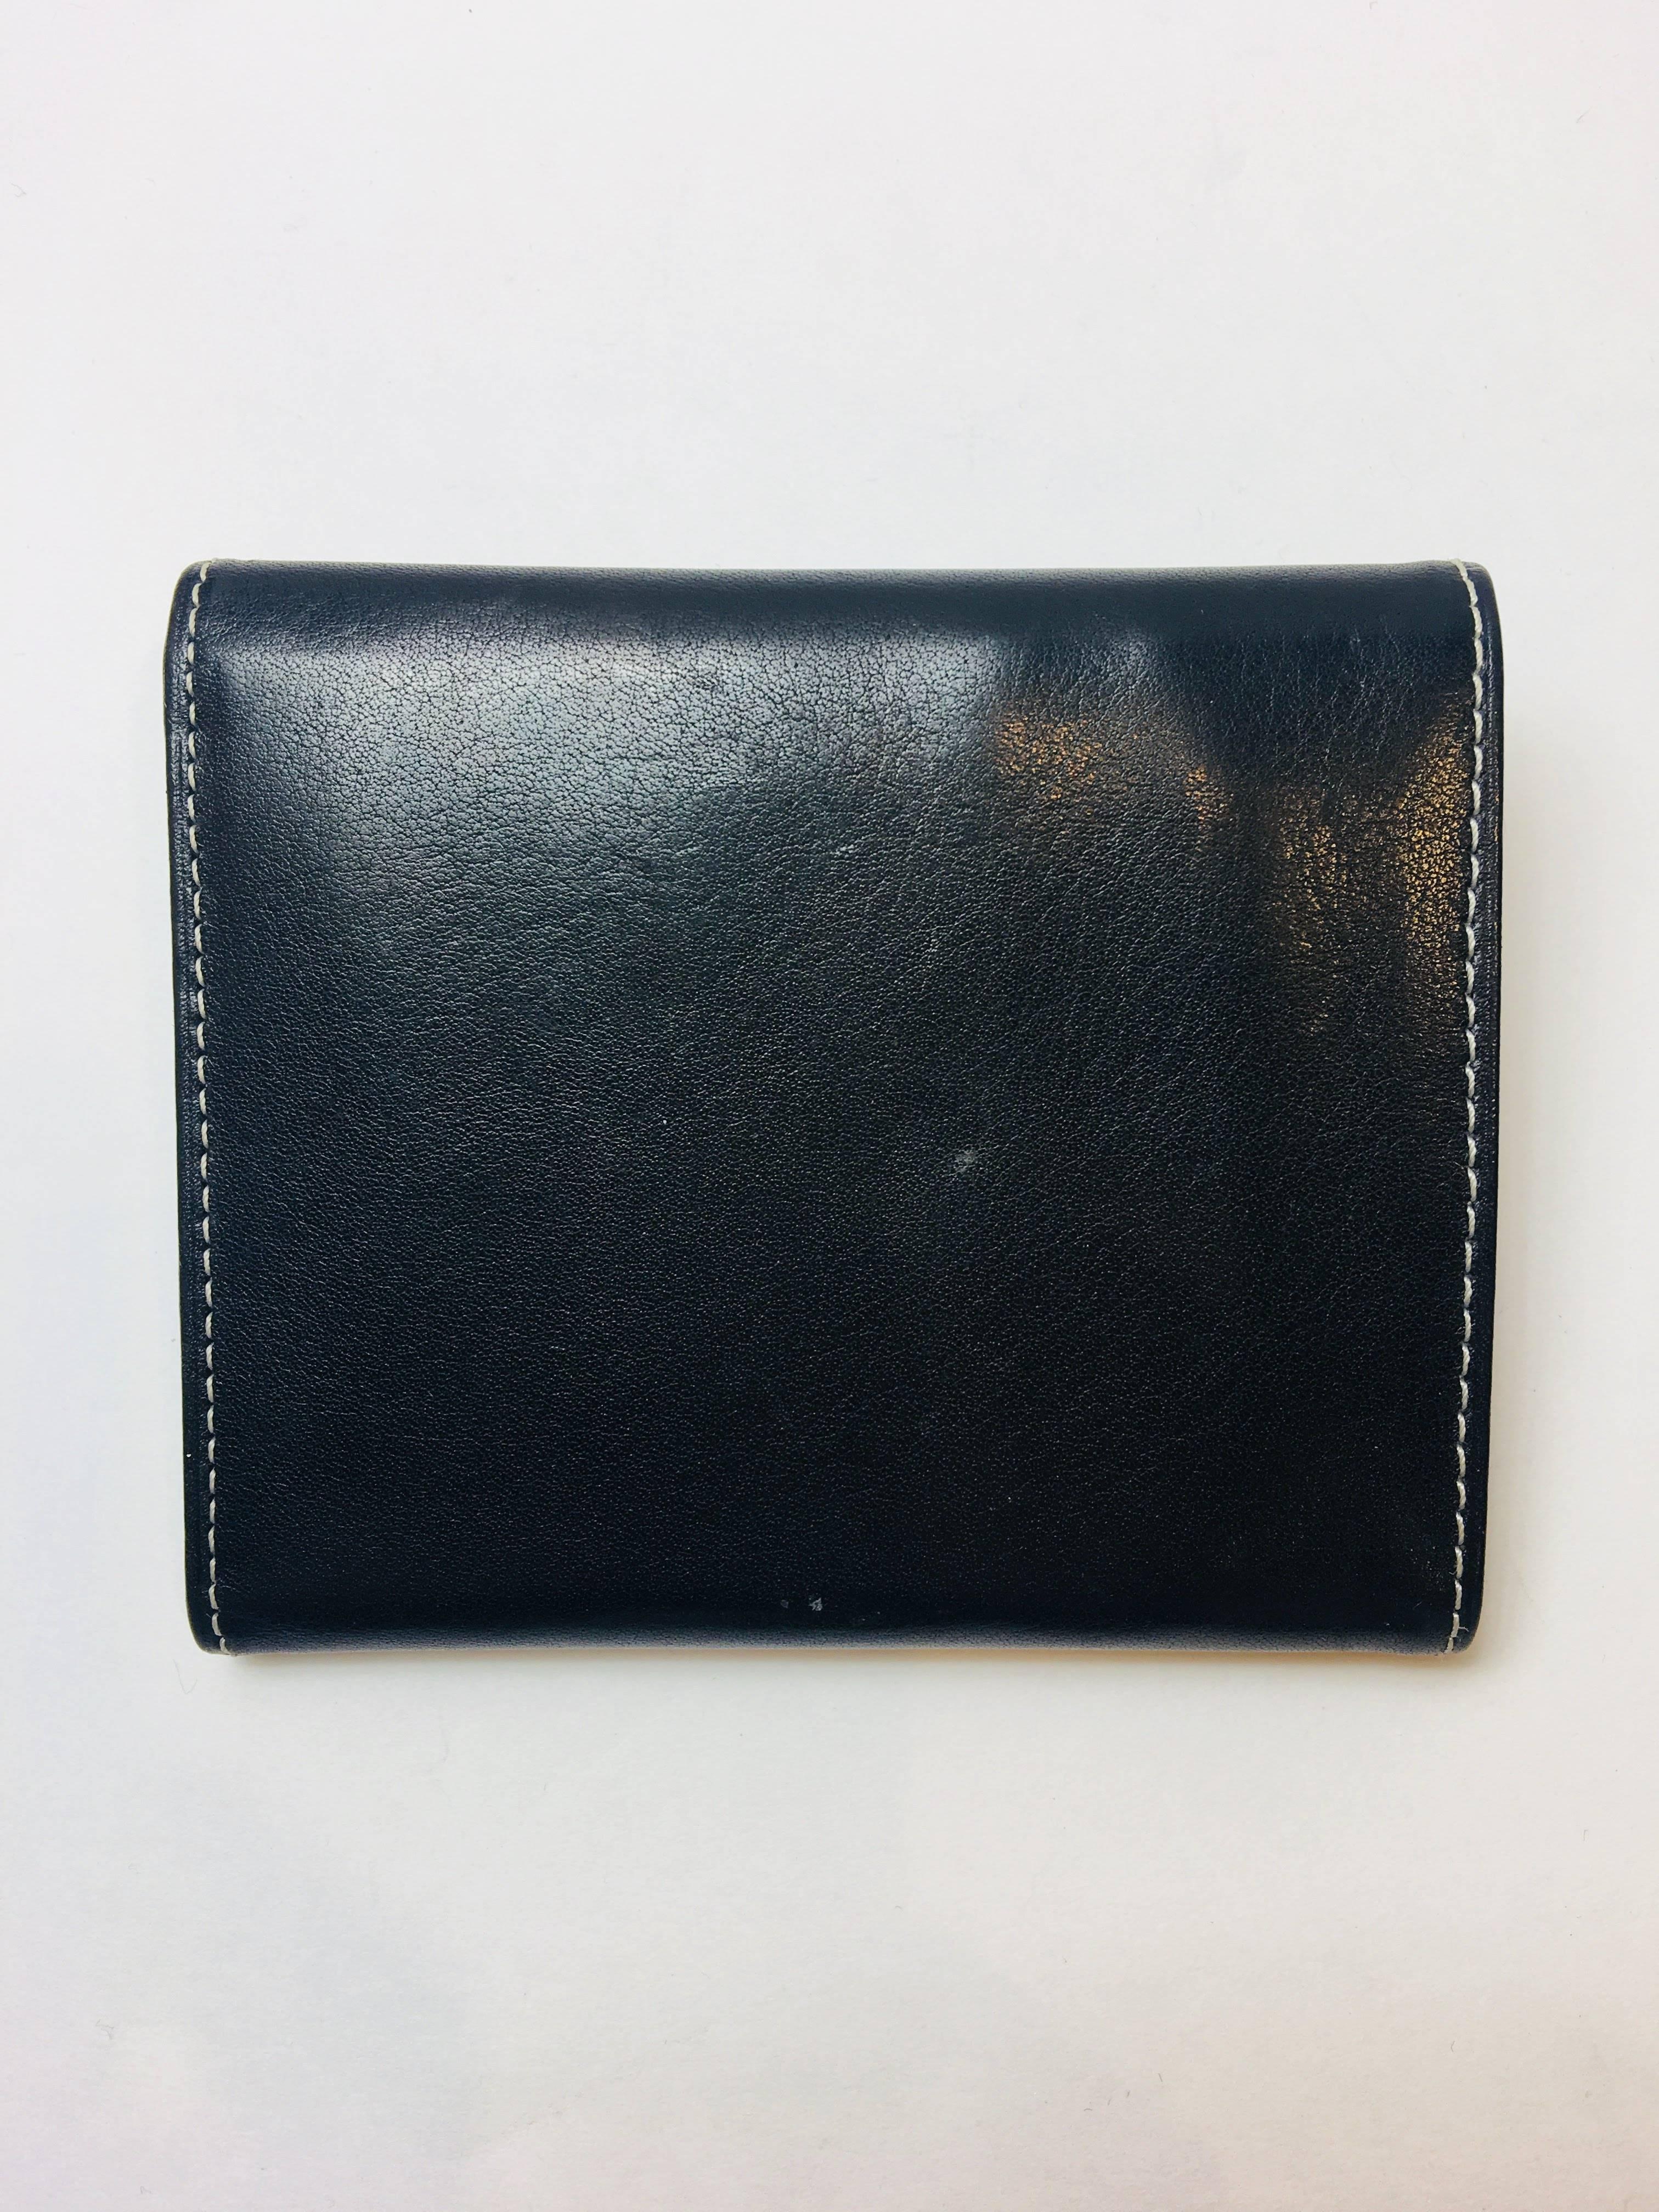 Marc Jacobs Small Black Leather Wallet